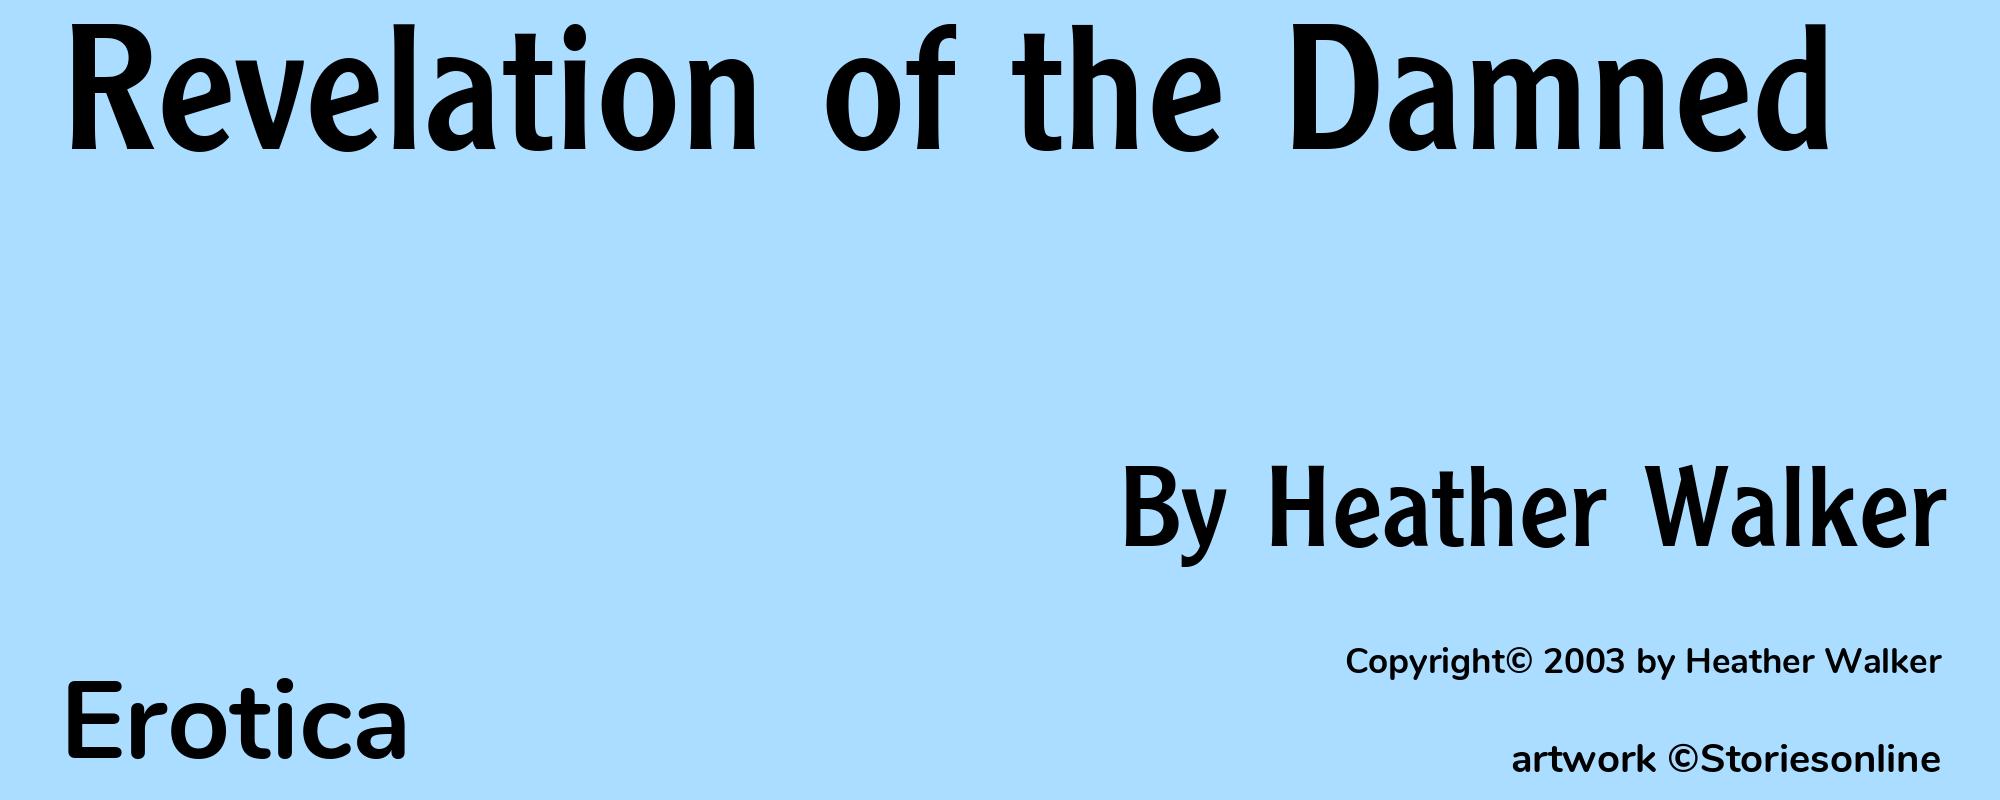 Revelation of the Damned - Cover